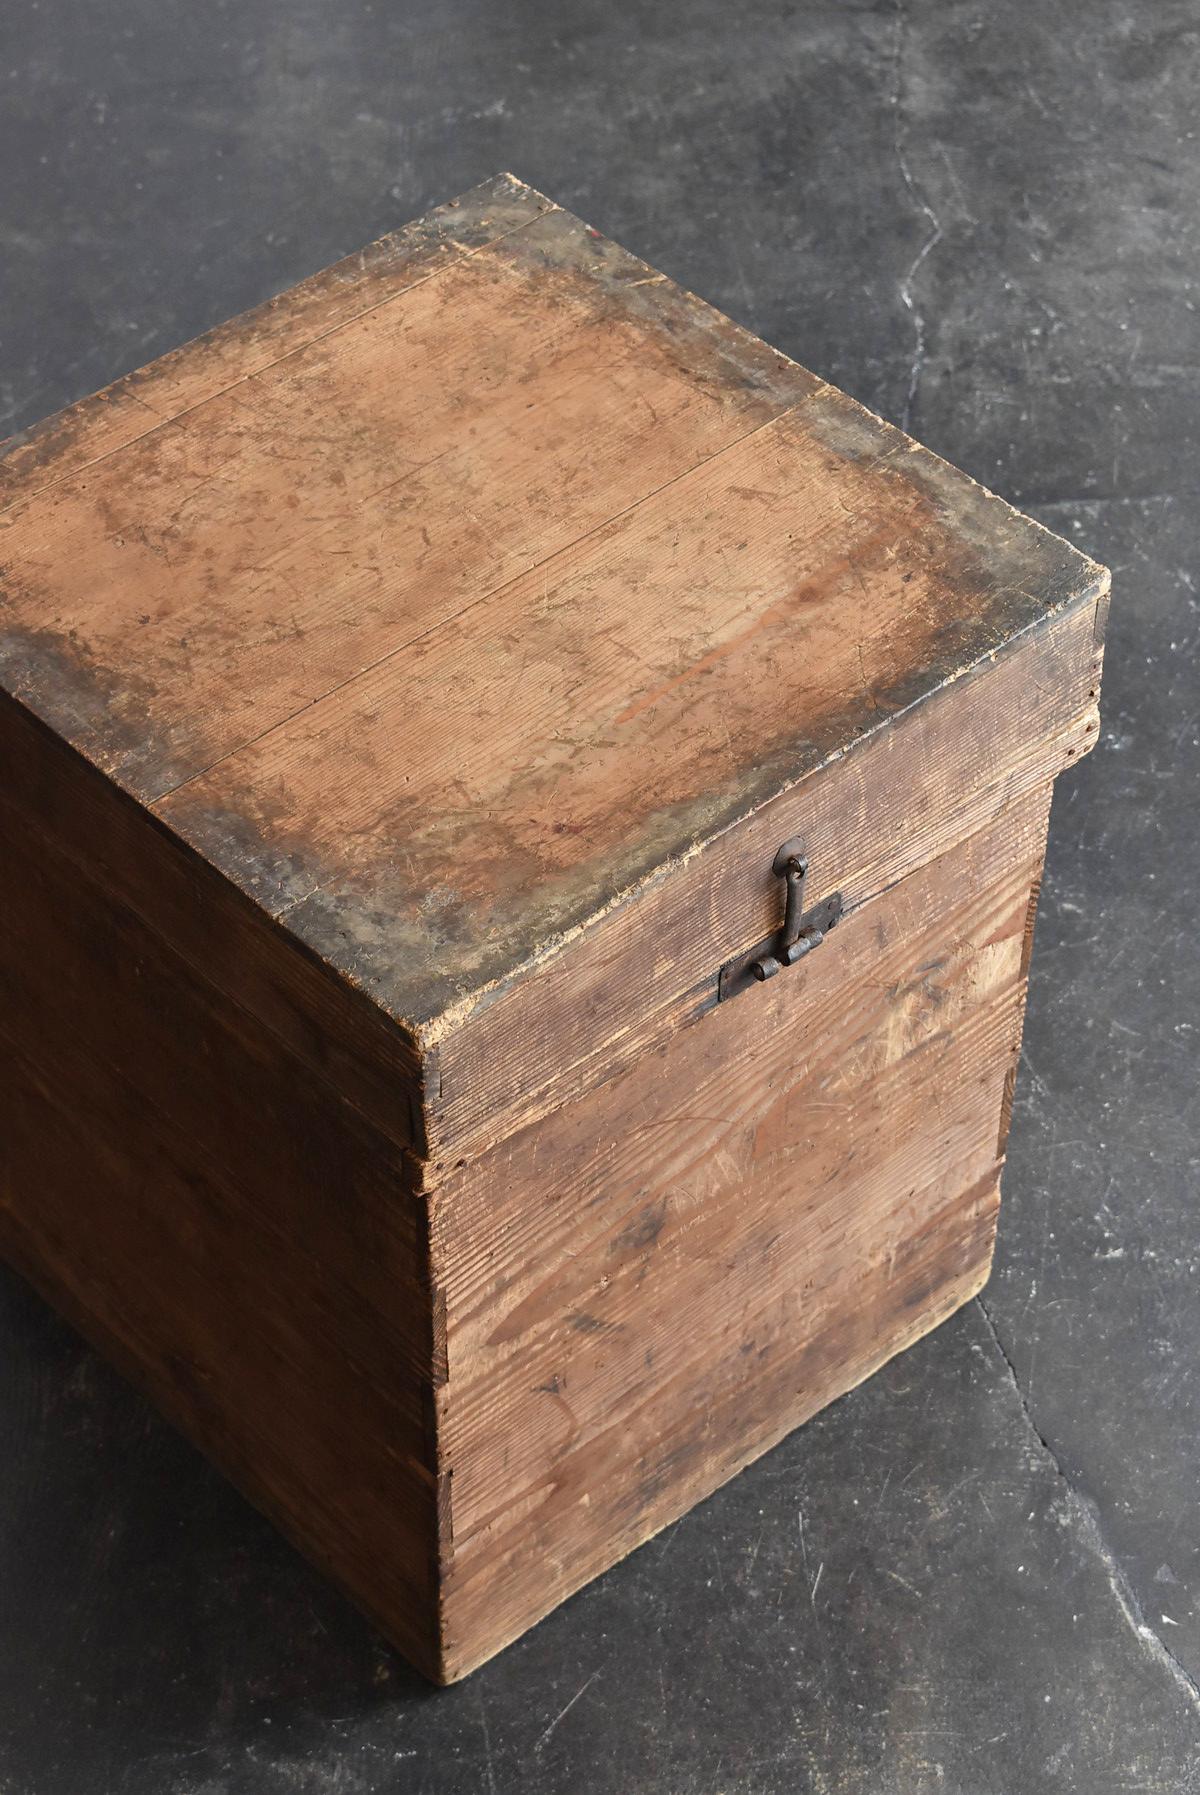 Woodwork Japanese Antique Wooden Box / Backpack Type / Coffee Table / Square Stool